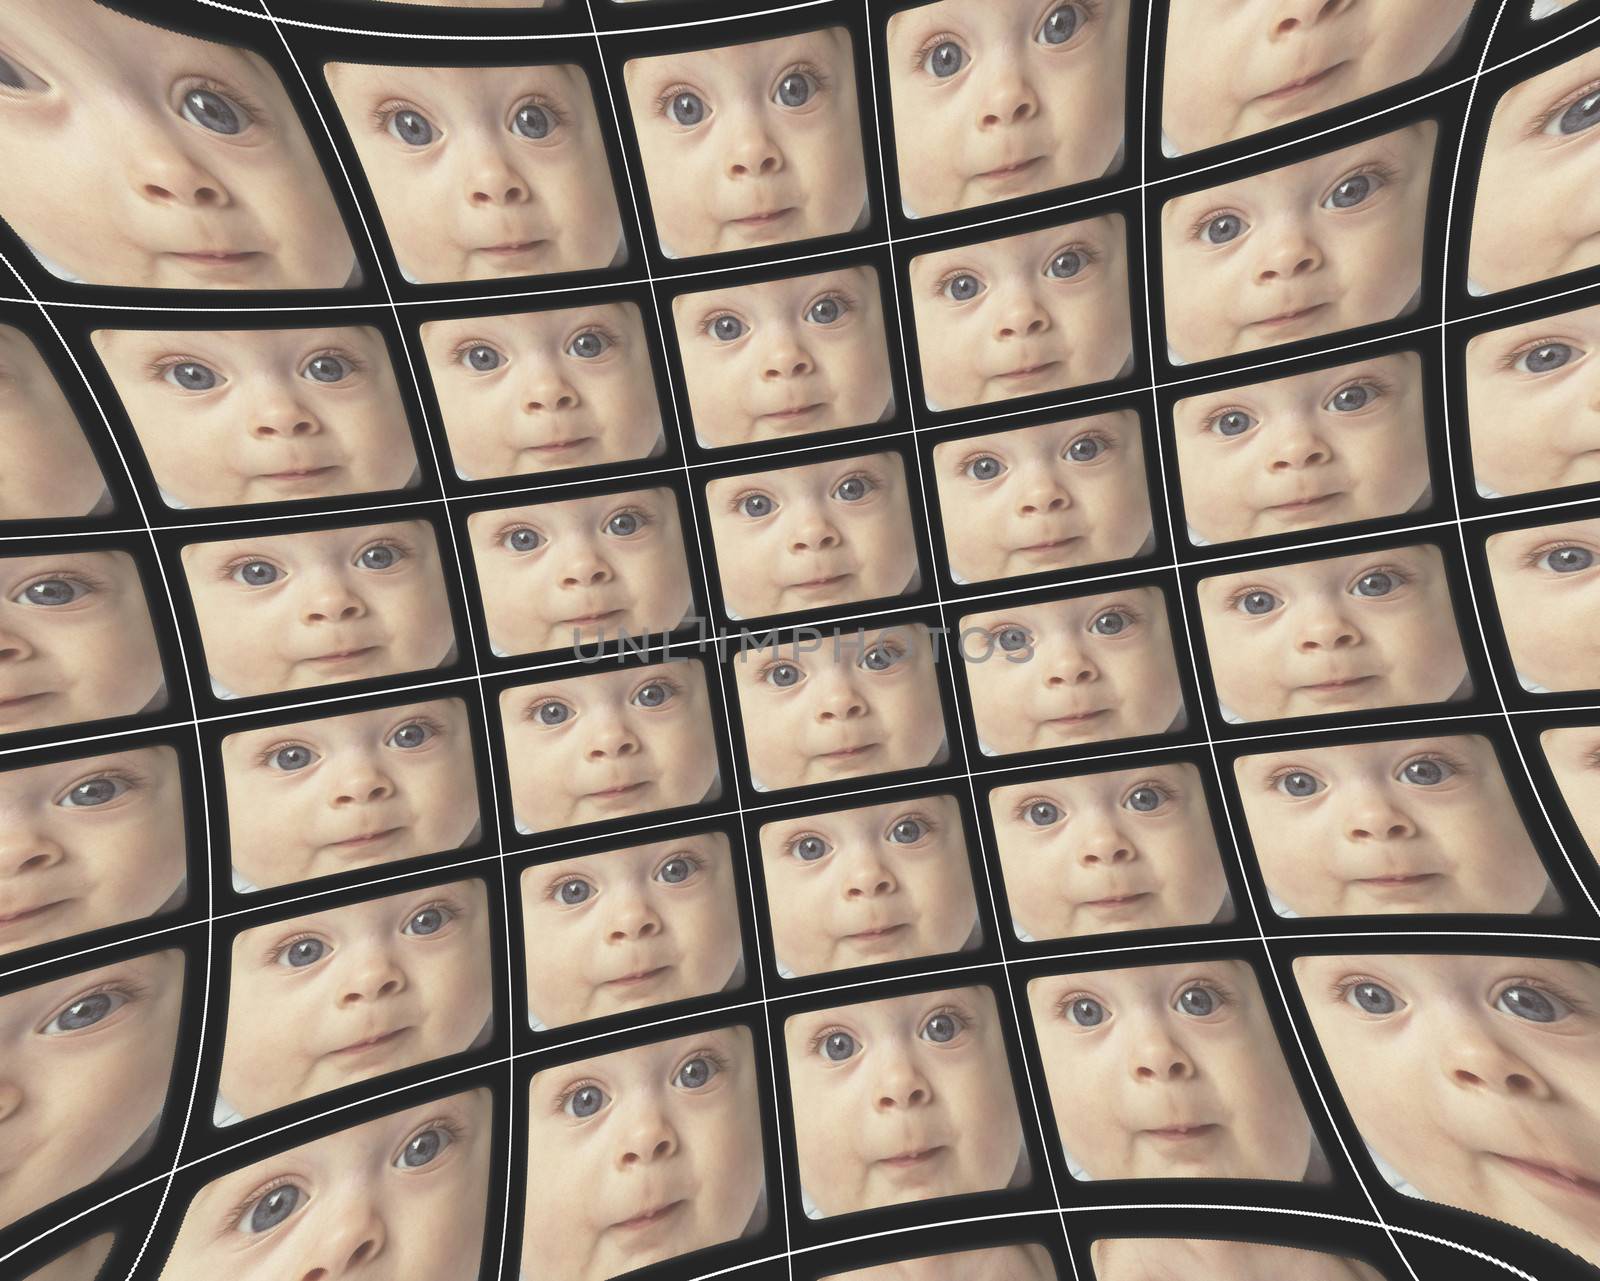 Distorted video screens showing the faces of a baby by Balefire9